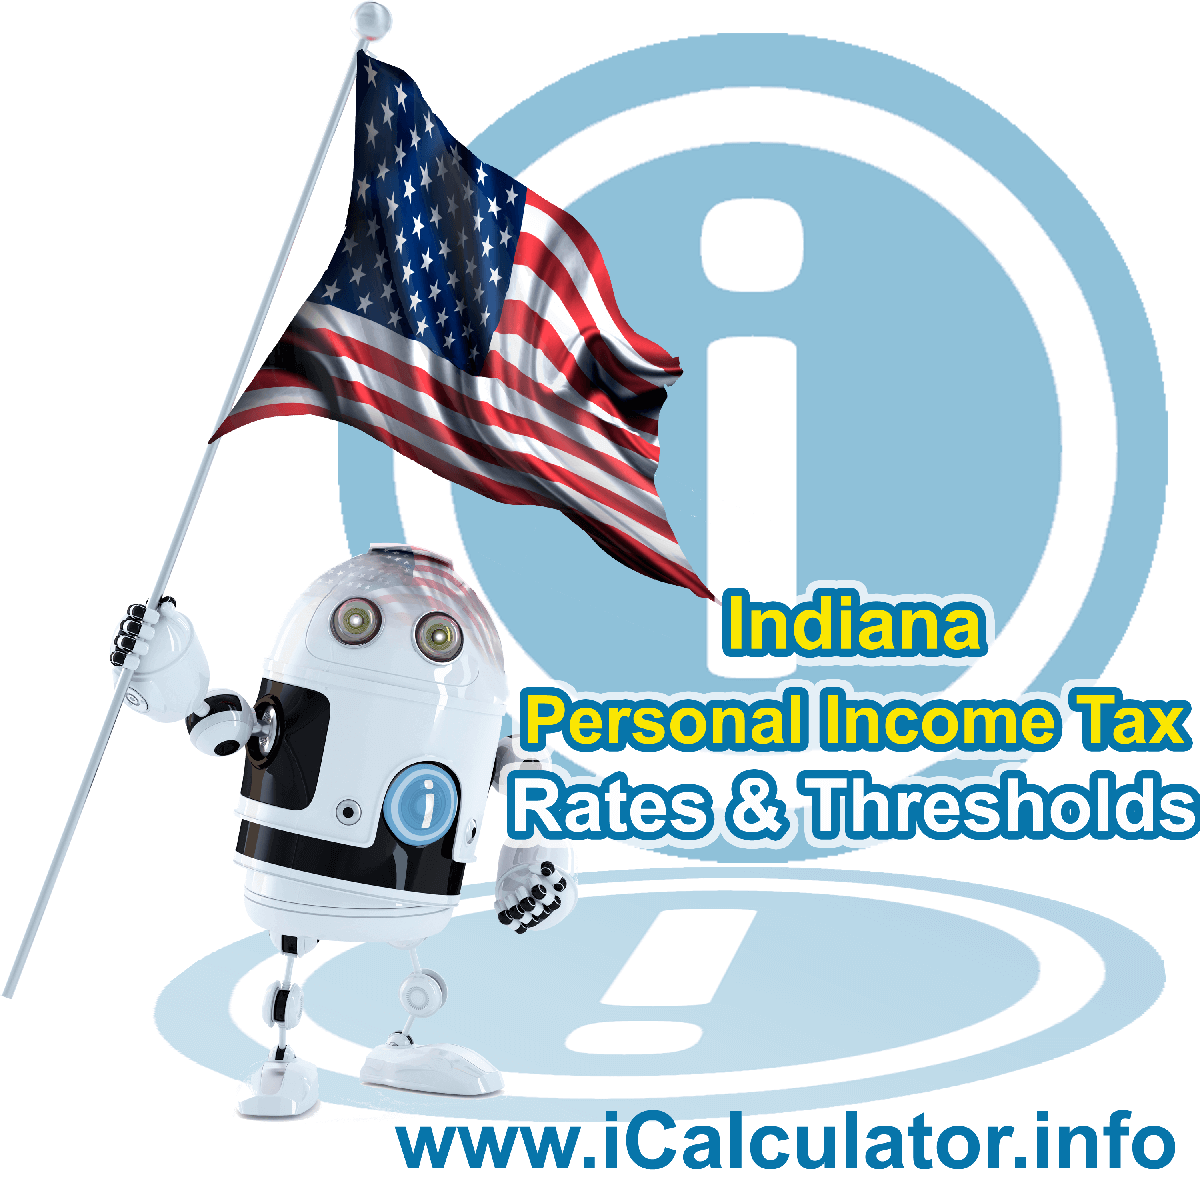 Indiana State Tax Tables 2016. This image displays details of the Indiana State Tax Tables for the 2016 tax return year which is provided in support of the 2016 US Tax Calculator